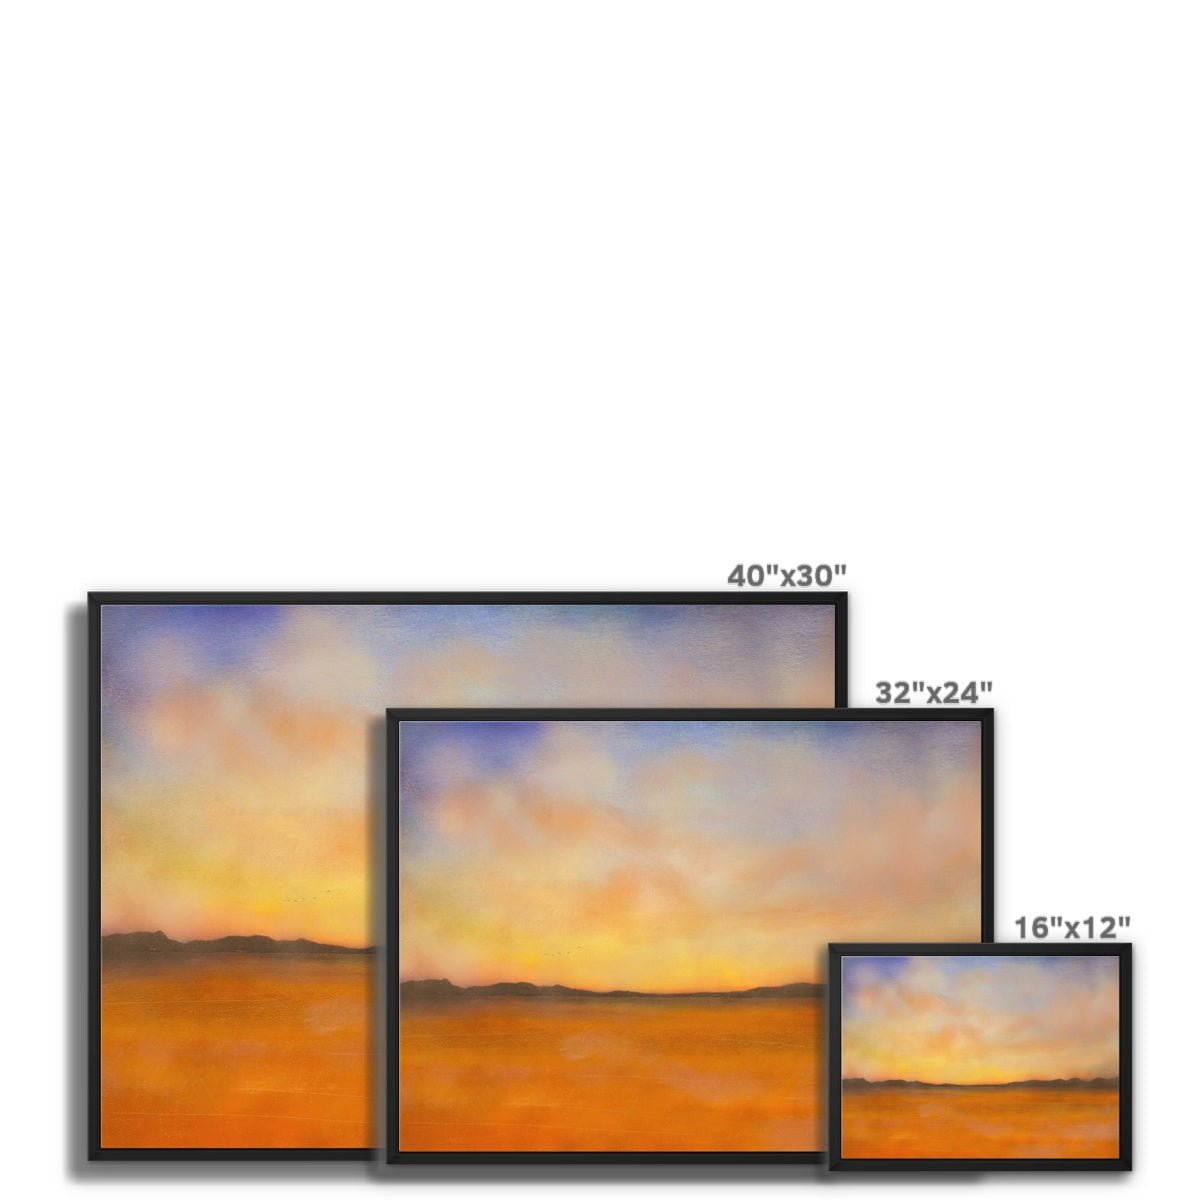 Islay Dawn Painting | Framed Canvas From Scotland-Floating Framed Canvas Prints-Hebridean Islands Art Gallery-Paintings, Prints, Homeware, Art Gifts From Scotland By Scottish Artist Kevin Hunter